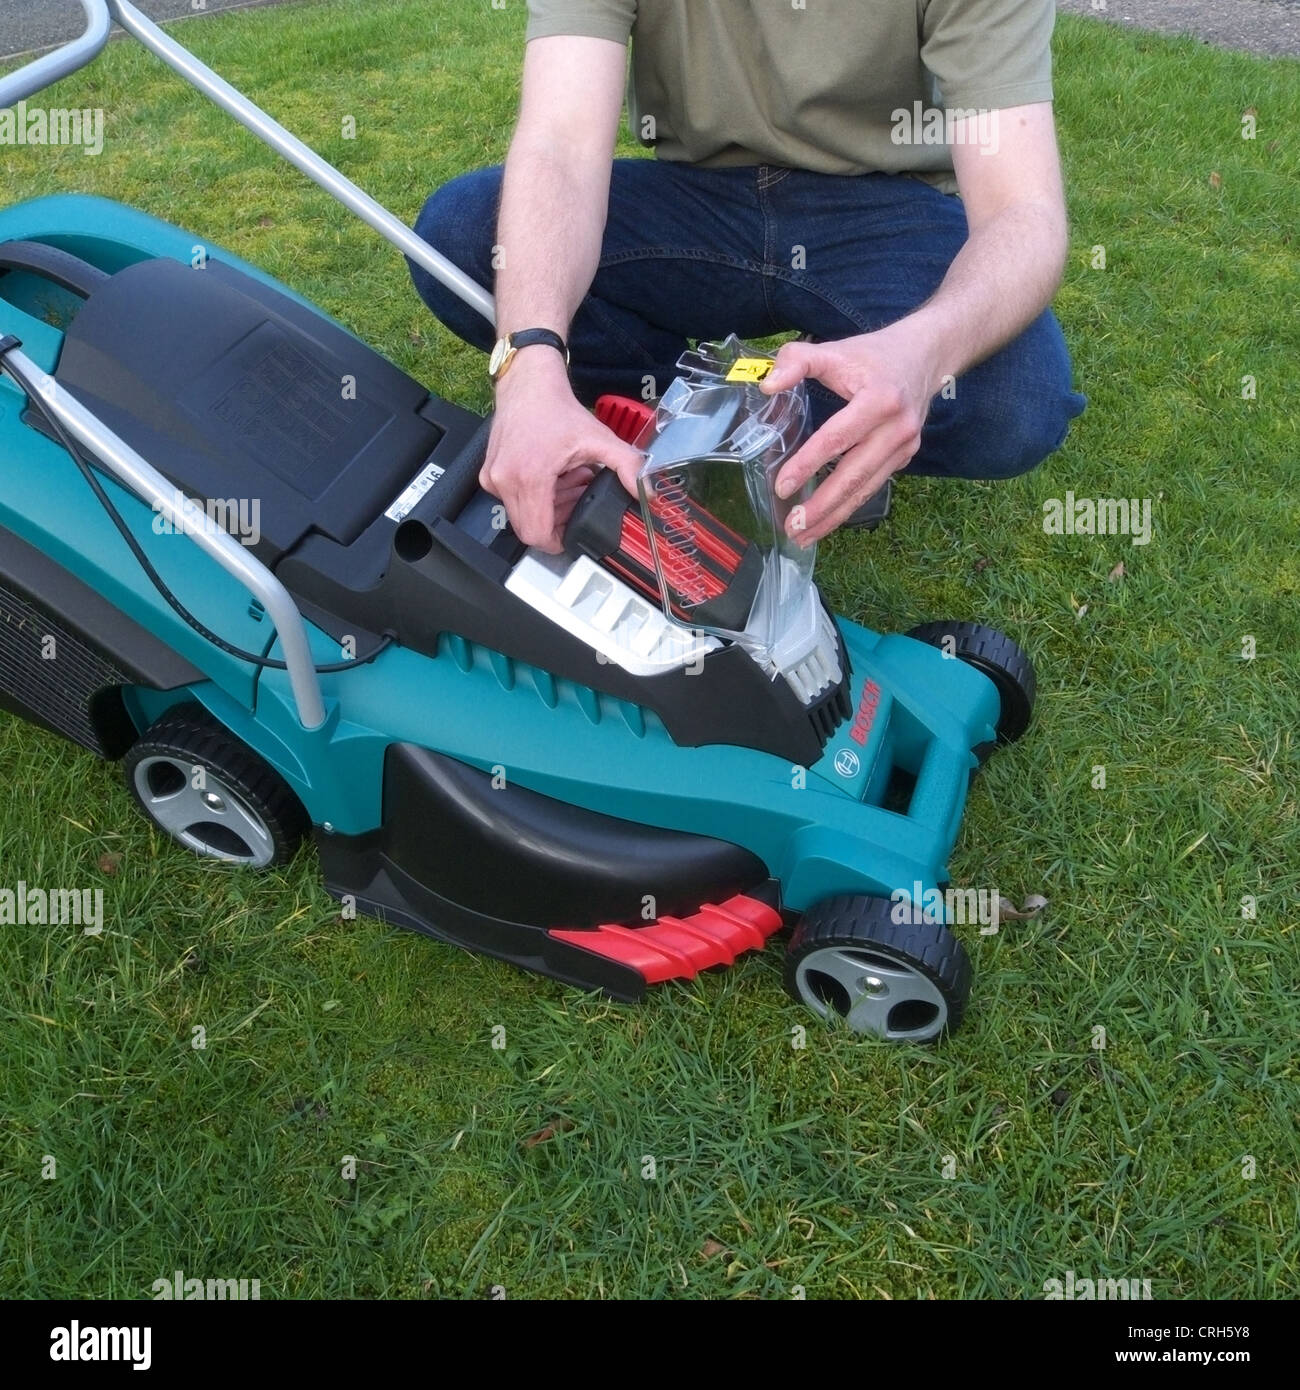 Caucasian Man Changing a Rechargeable Battery on a Bosch Rechargeable  Electric Lawnmower MODEL RELEASED Stock Photo - Alamy